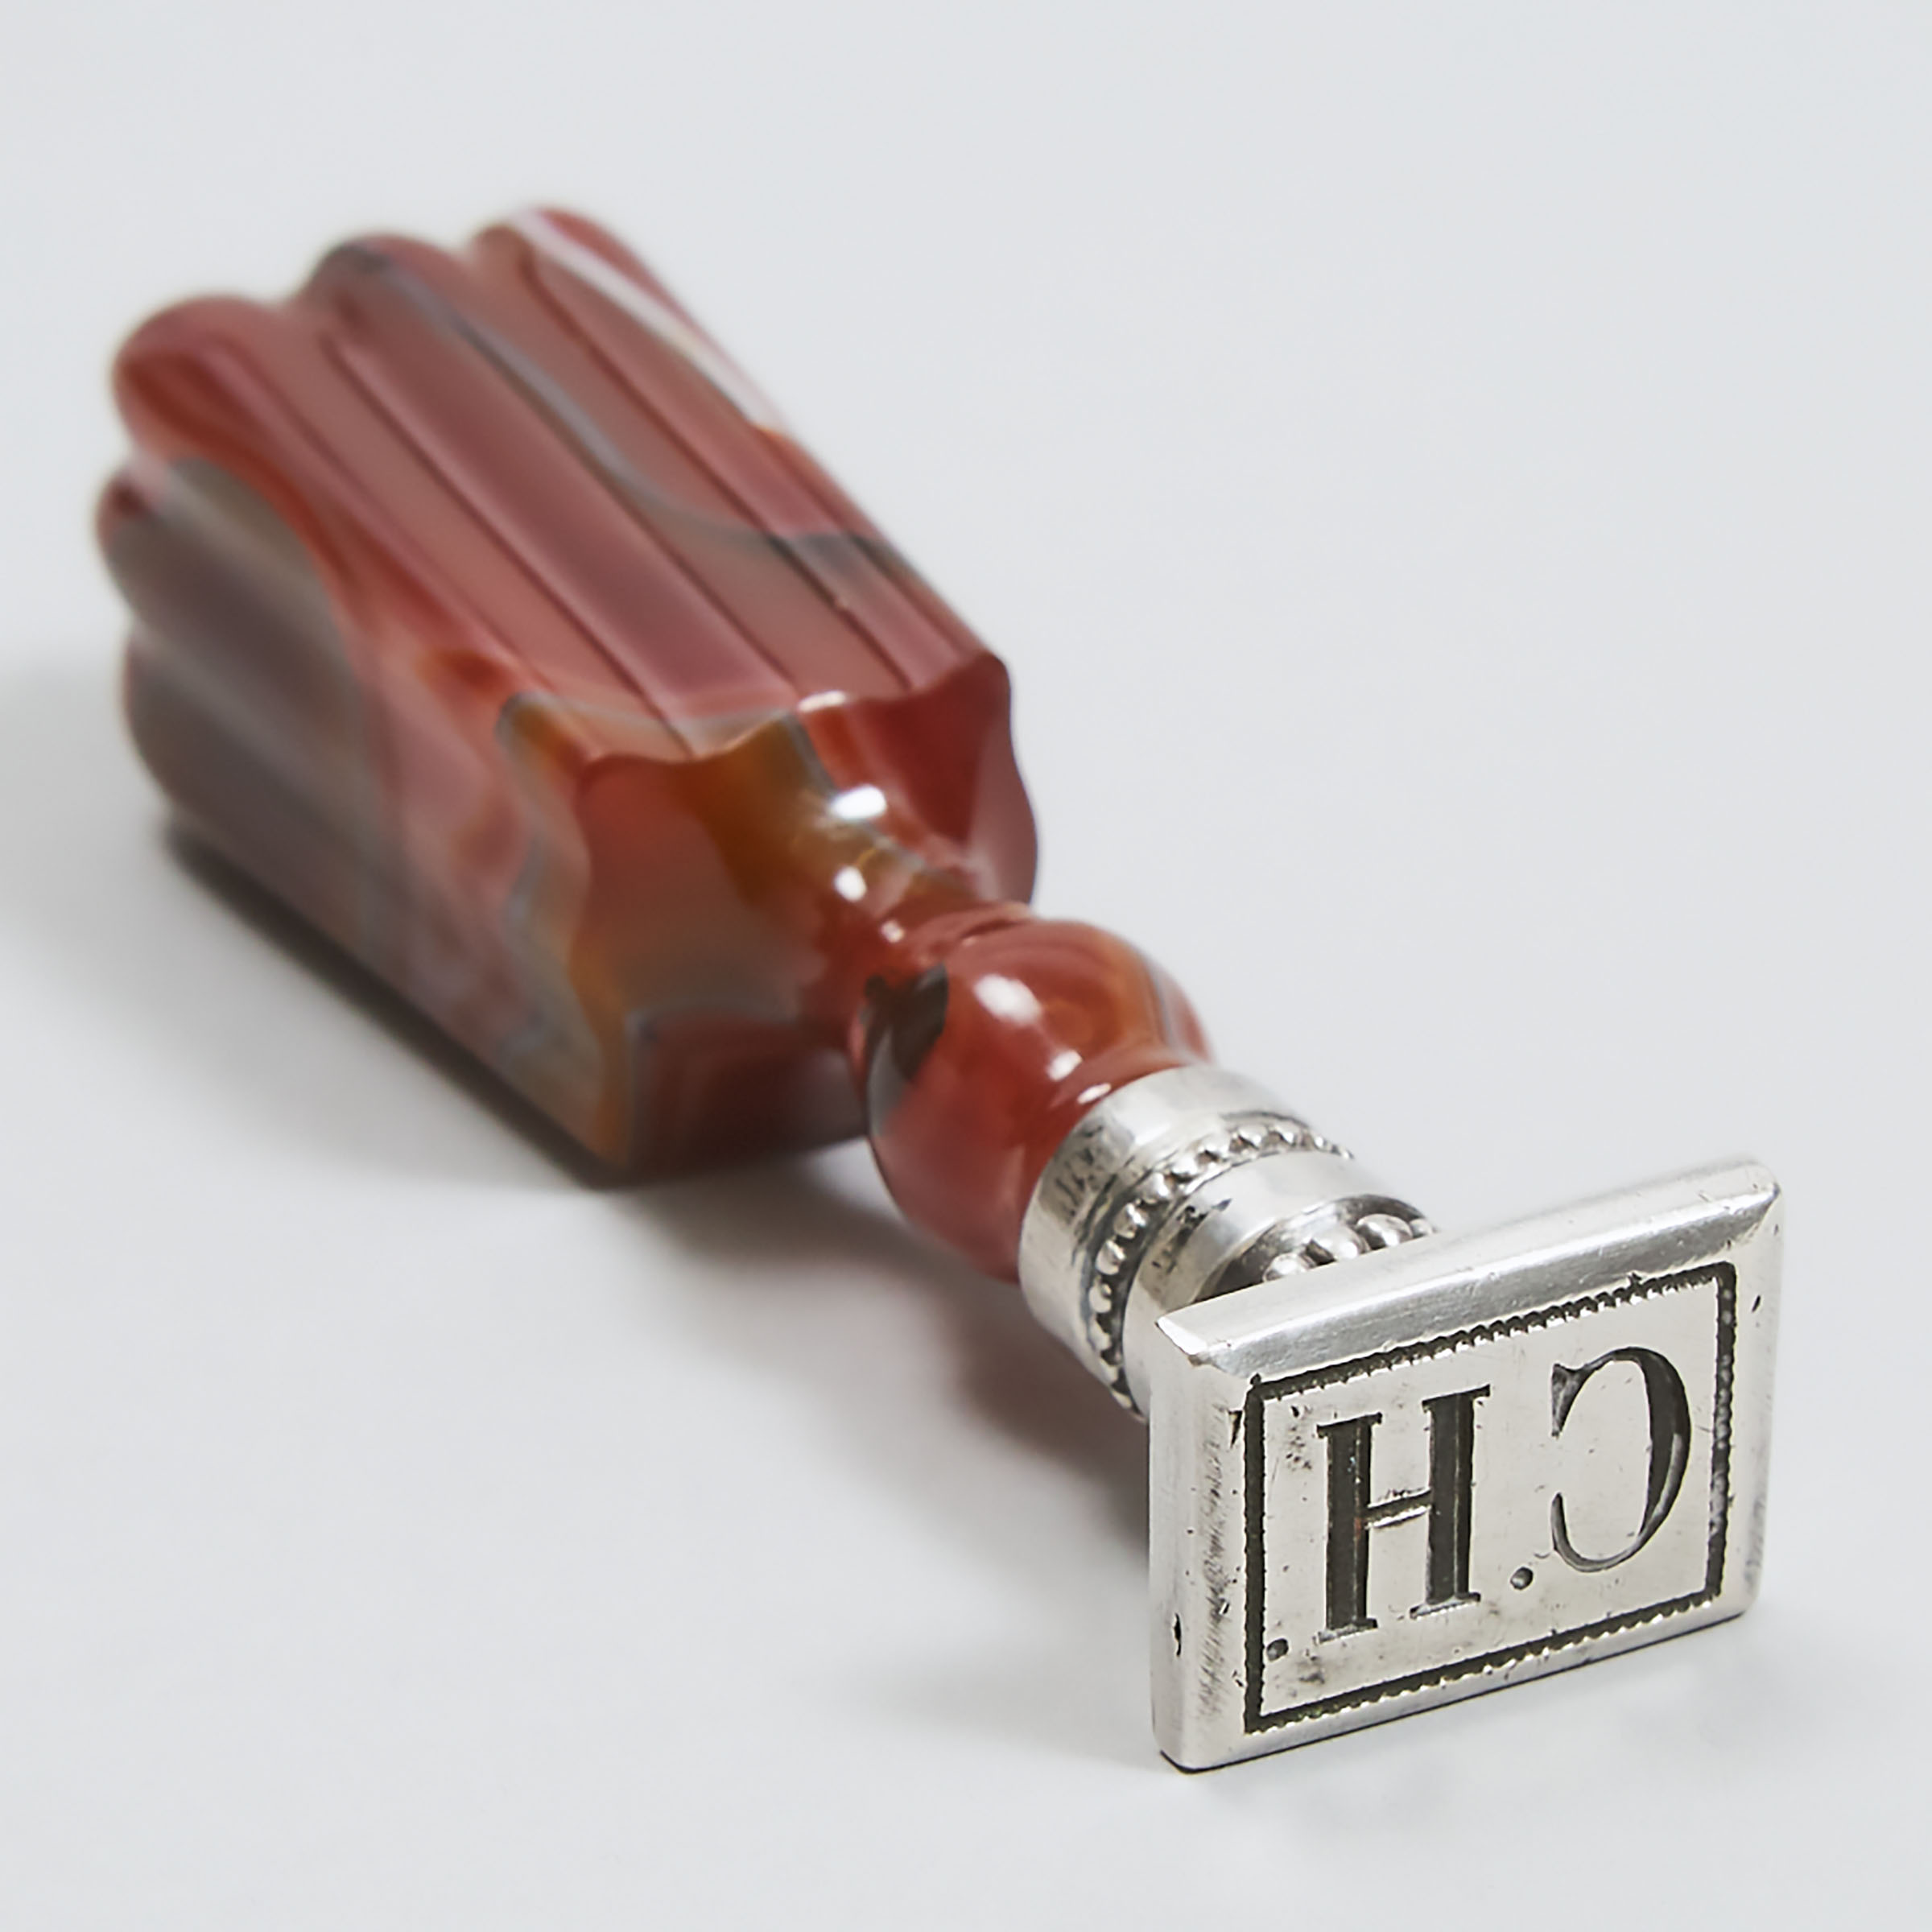 Silver Mounted Agate Desk Seal, 19th/early 20th century